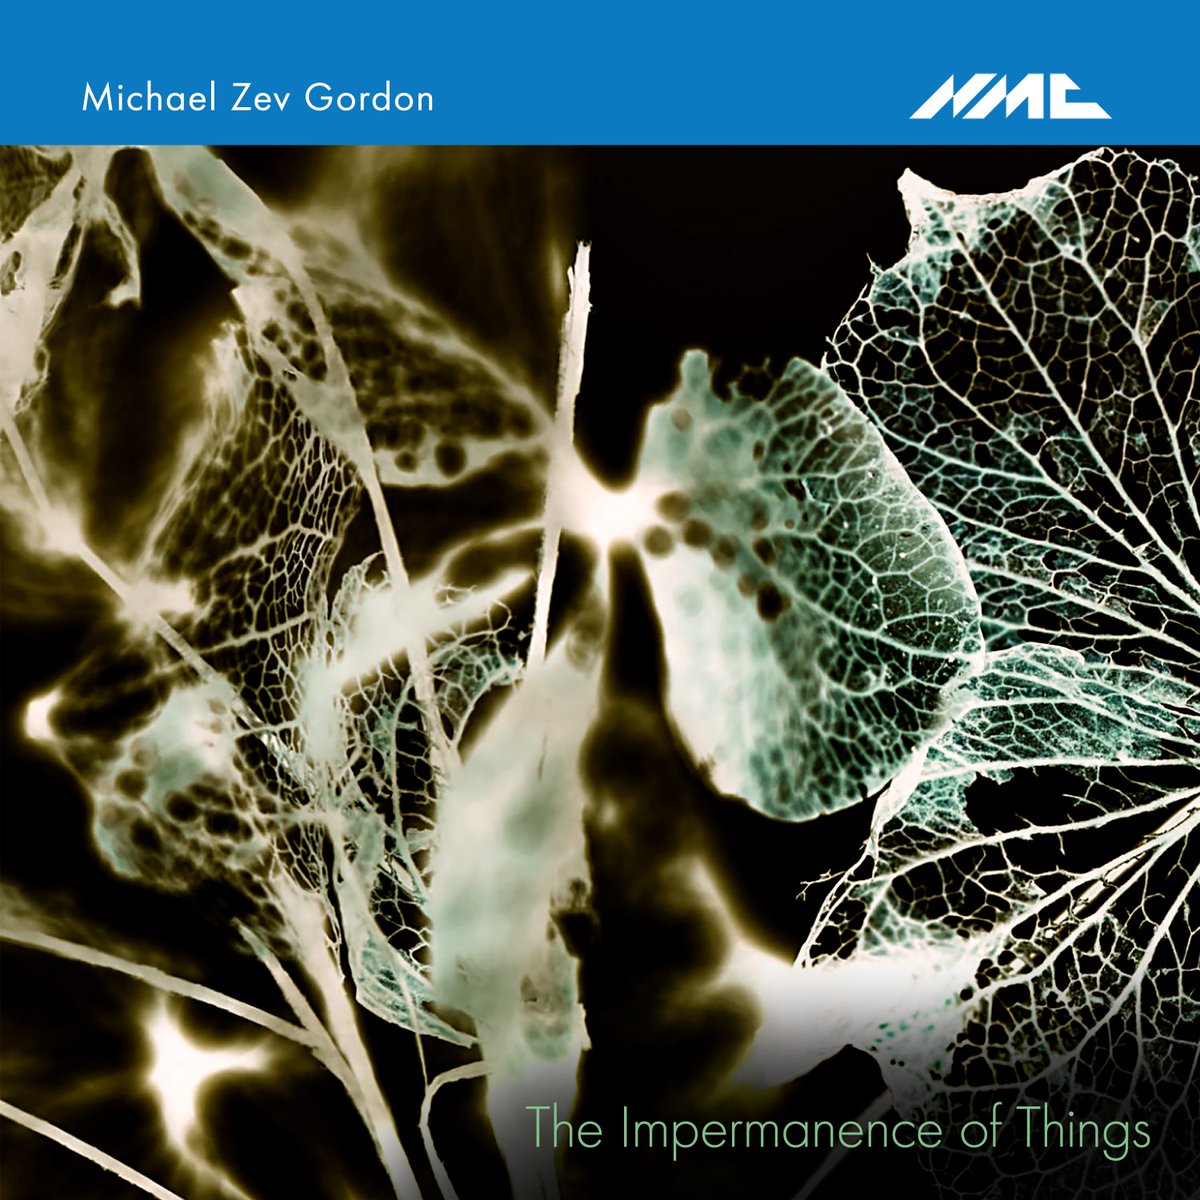 💿OUT NOW💿 ‘The Impermanence of Things’ - a new portrait album by composer Michael Zev Gordon 🔥 Listen/buy now: bit.ly/4ap0Sps @nmcrecordings